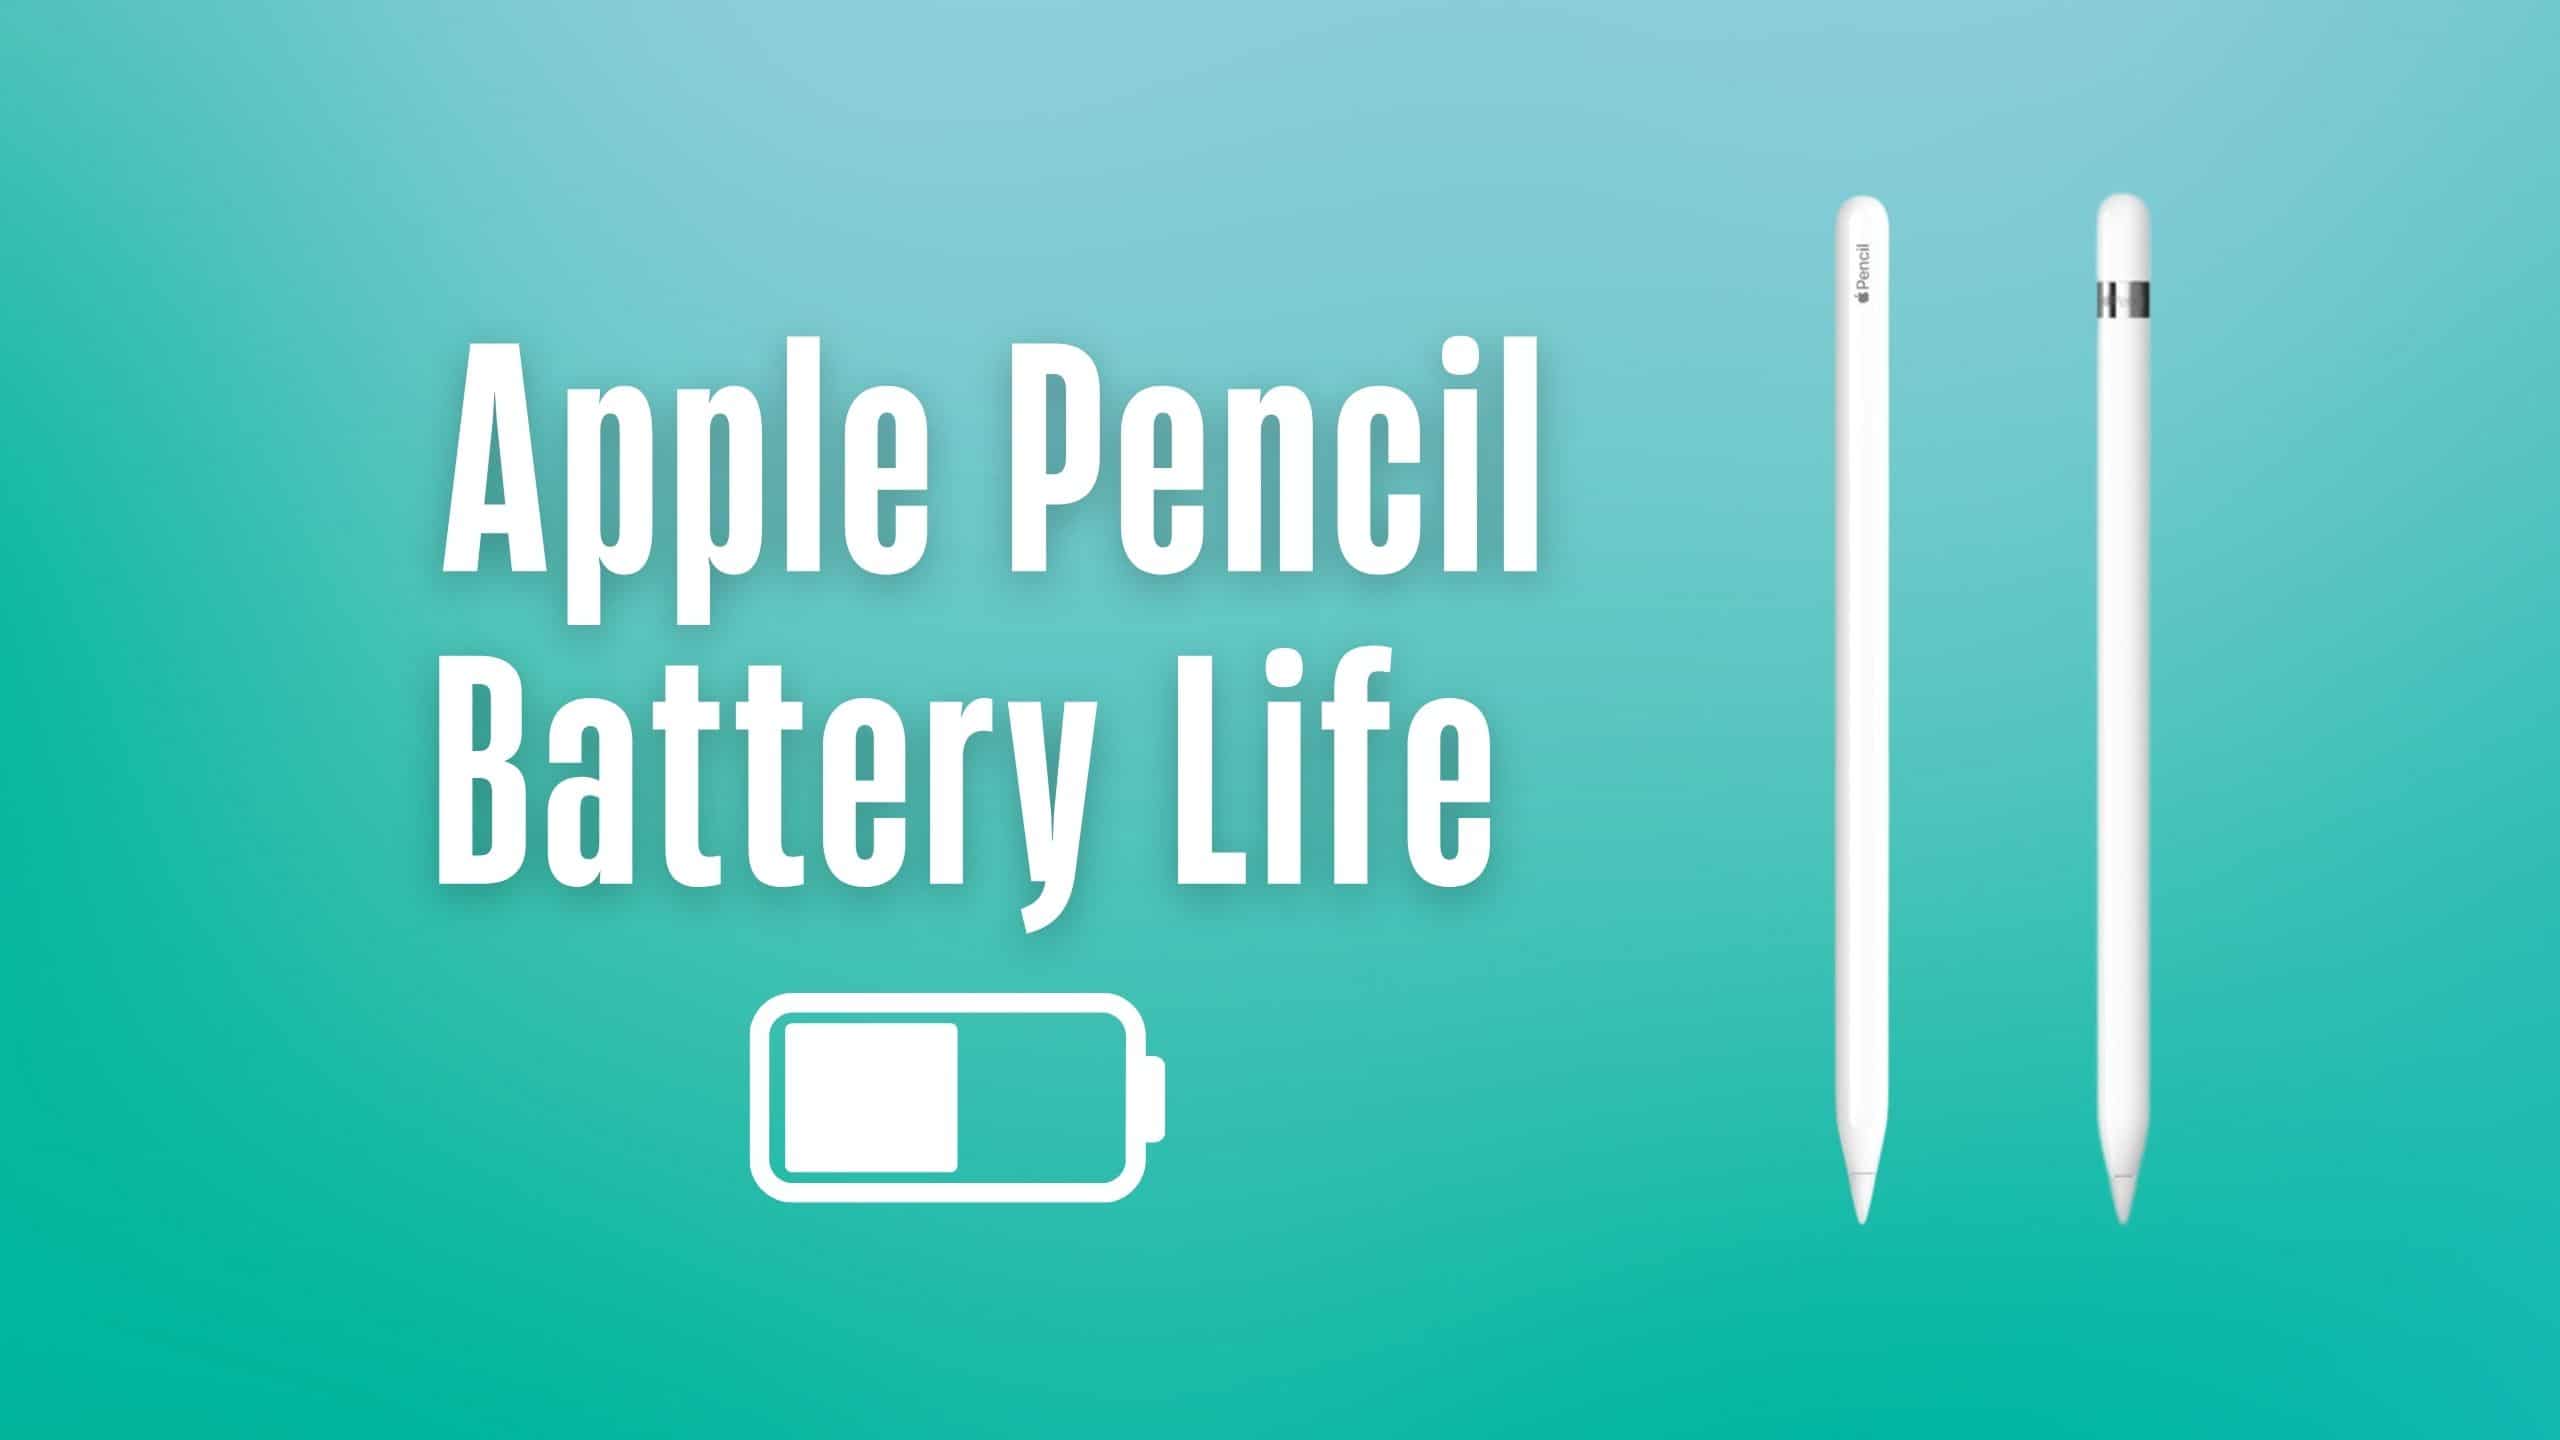 Does Apple Pencil lose battery when not in use?